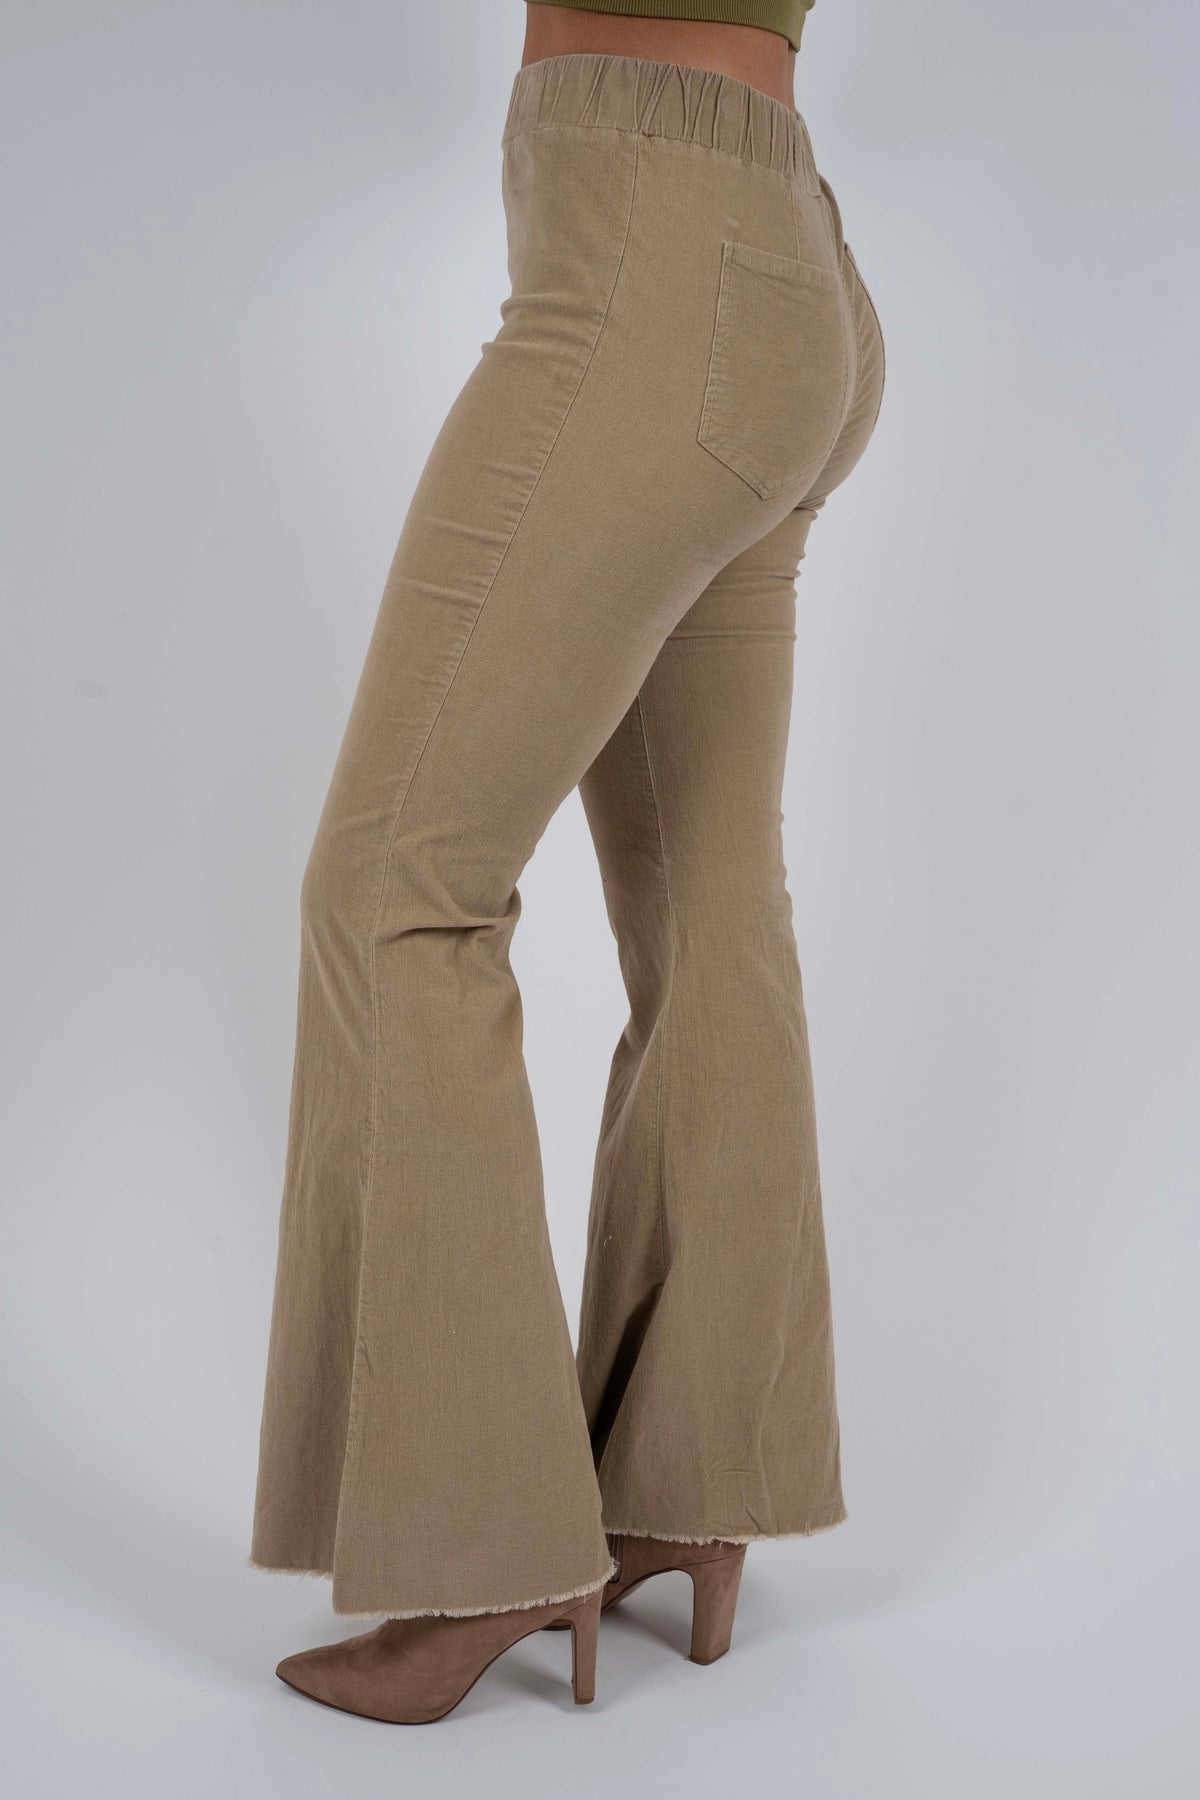 Around Downtown Corded Pants (Soybean)